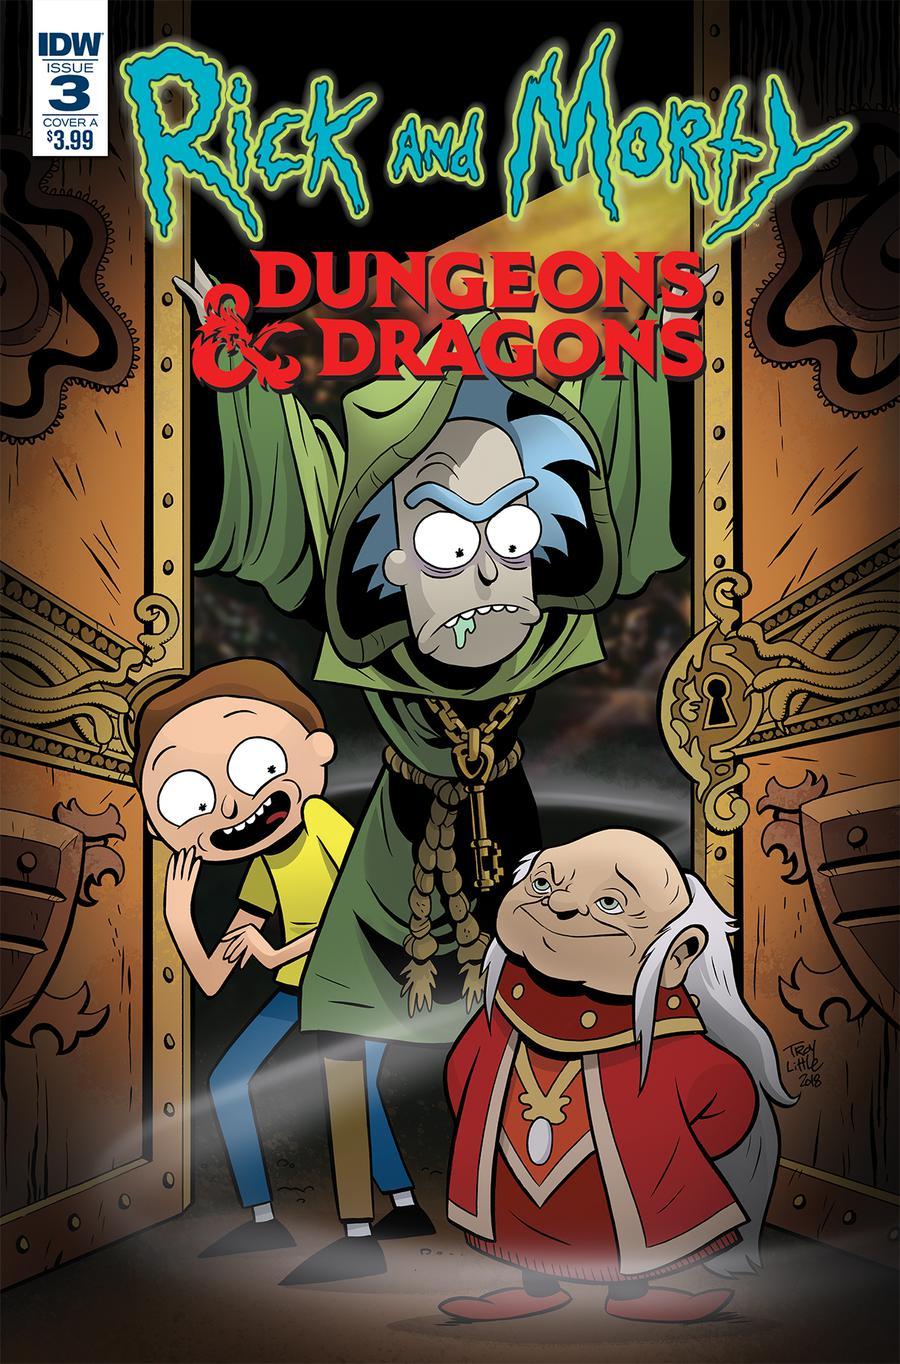 Rick And Morty vs Dungeons & Dragons Vol. 1 #3